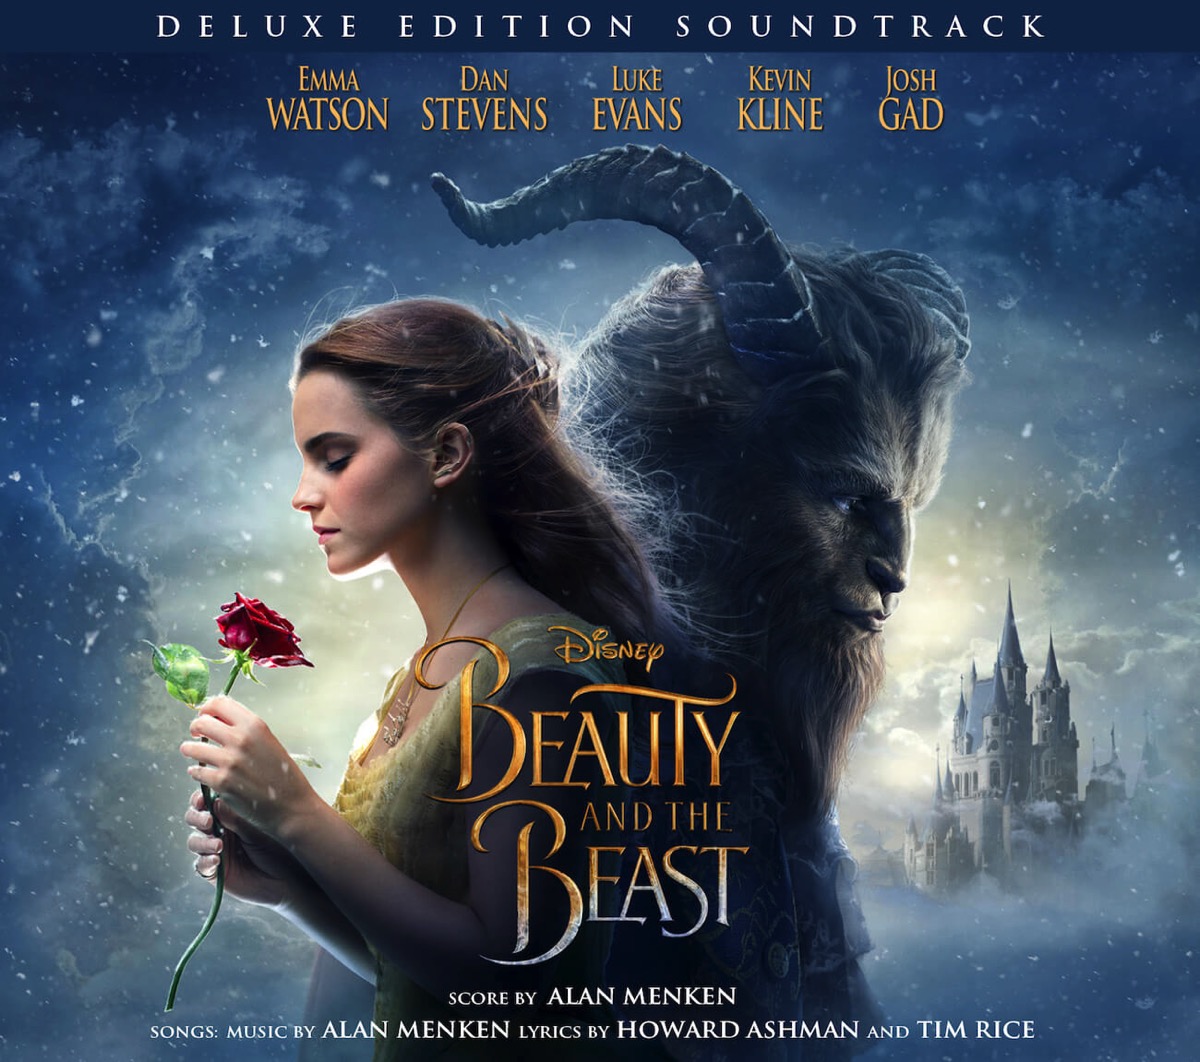 Beauty and the beast soundtrack